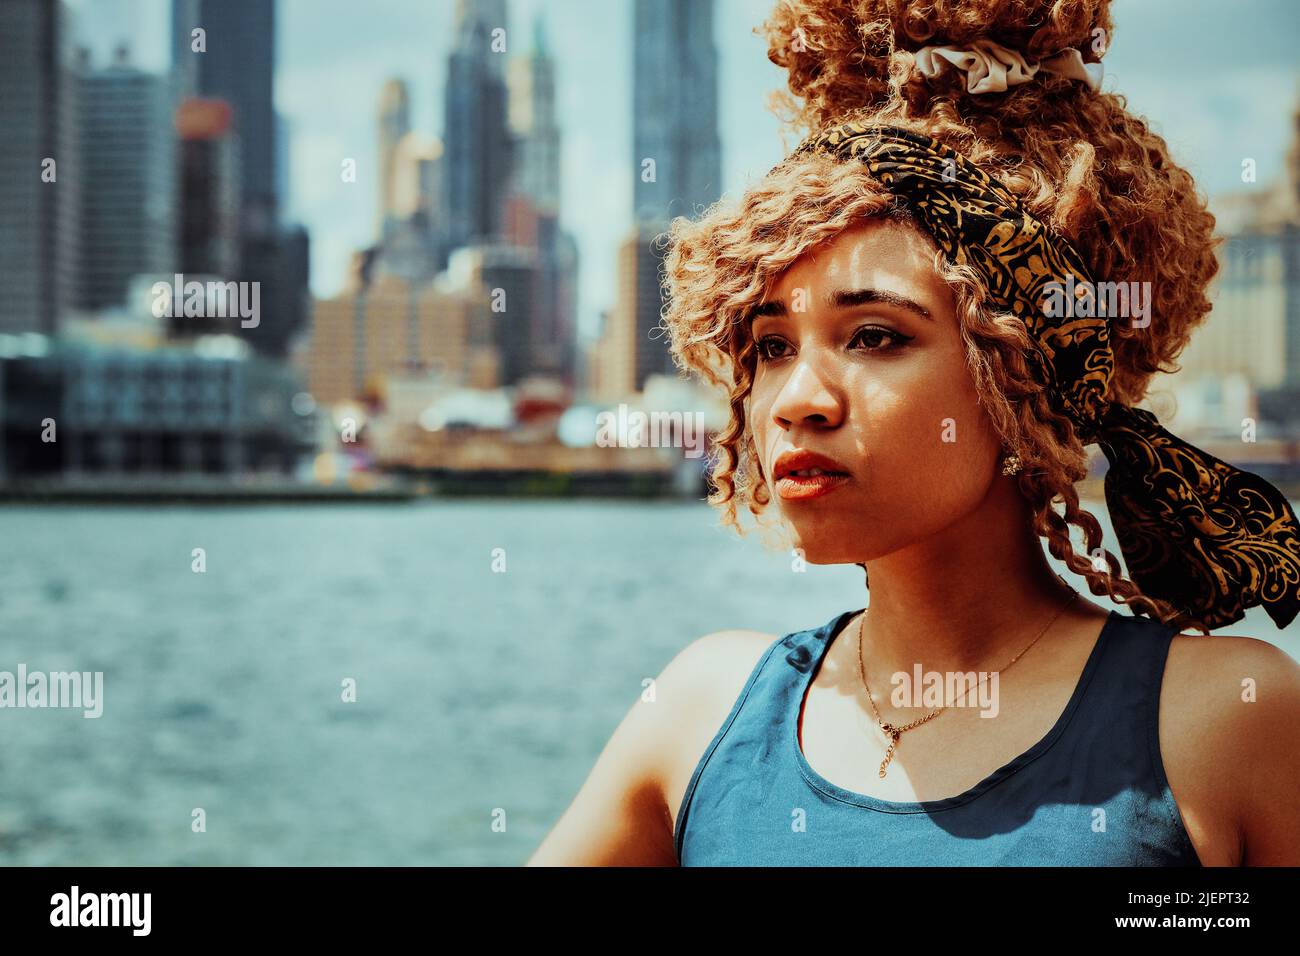 headshot beautiful young adult woman afro hairstyle with Manhattan New York City skyline in the background outdoors shot Stock Photo